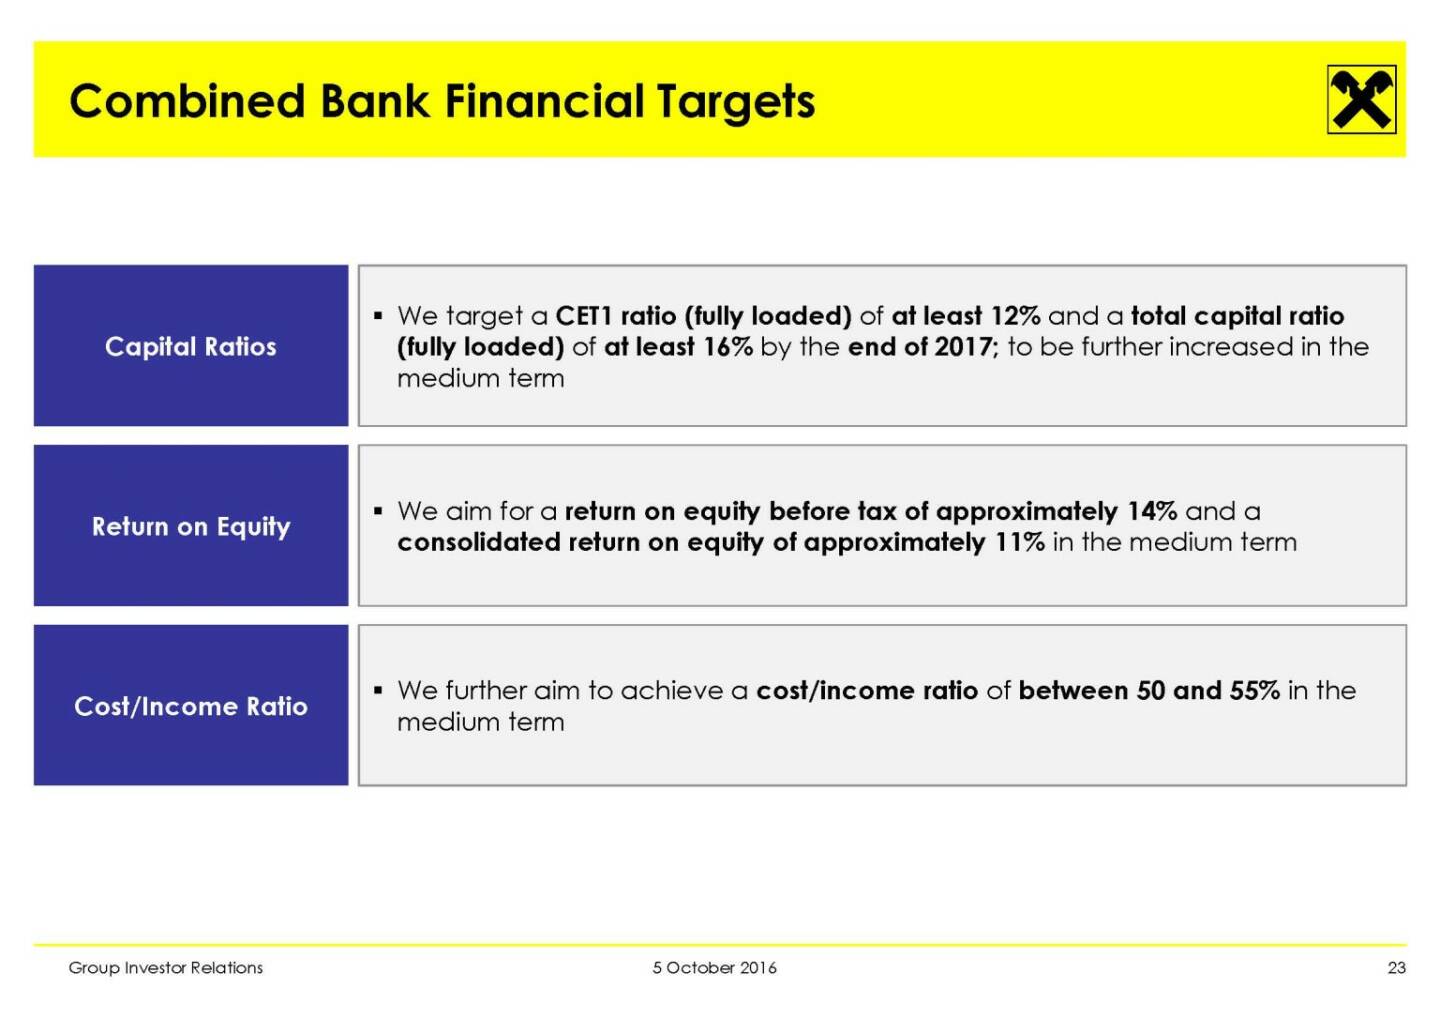 RBI - Combined Bank Financial Targets